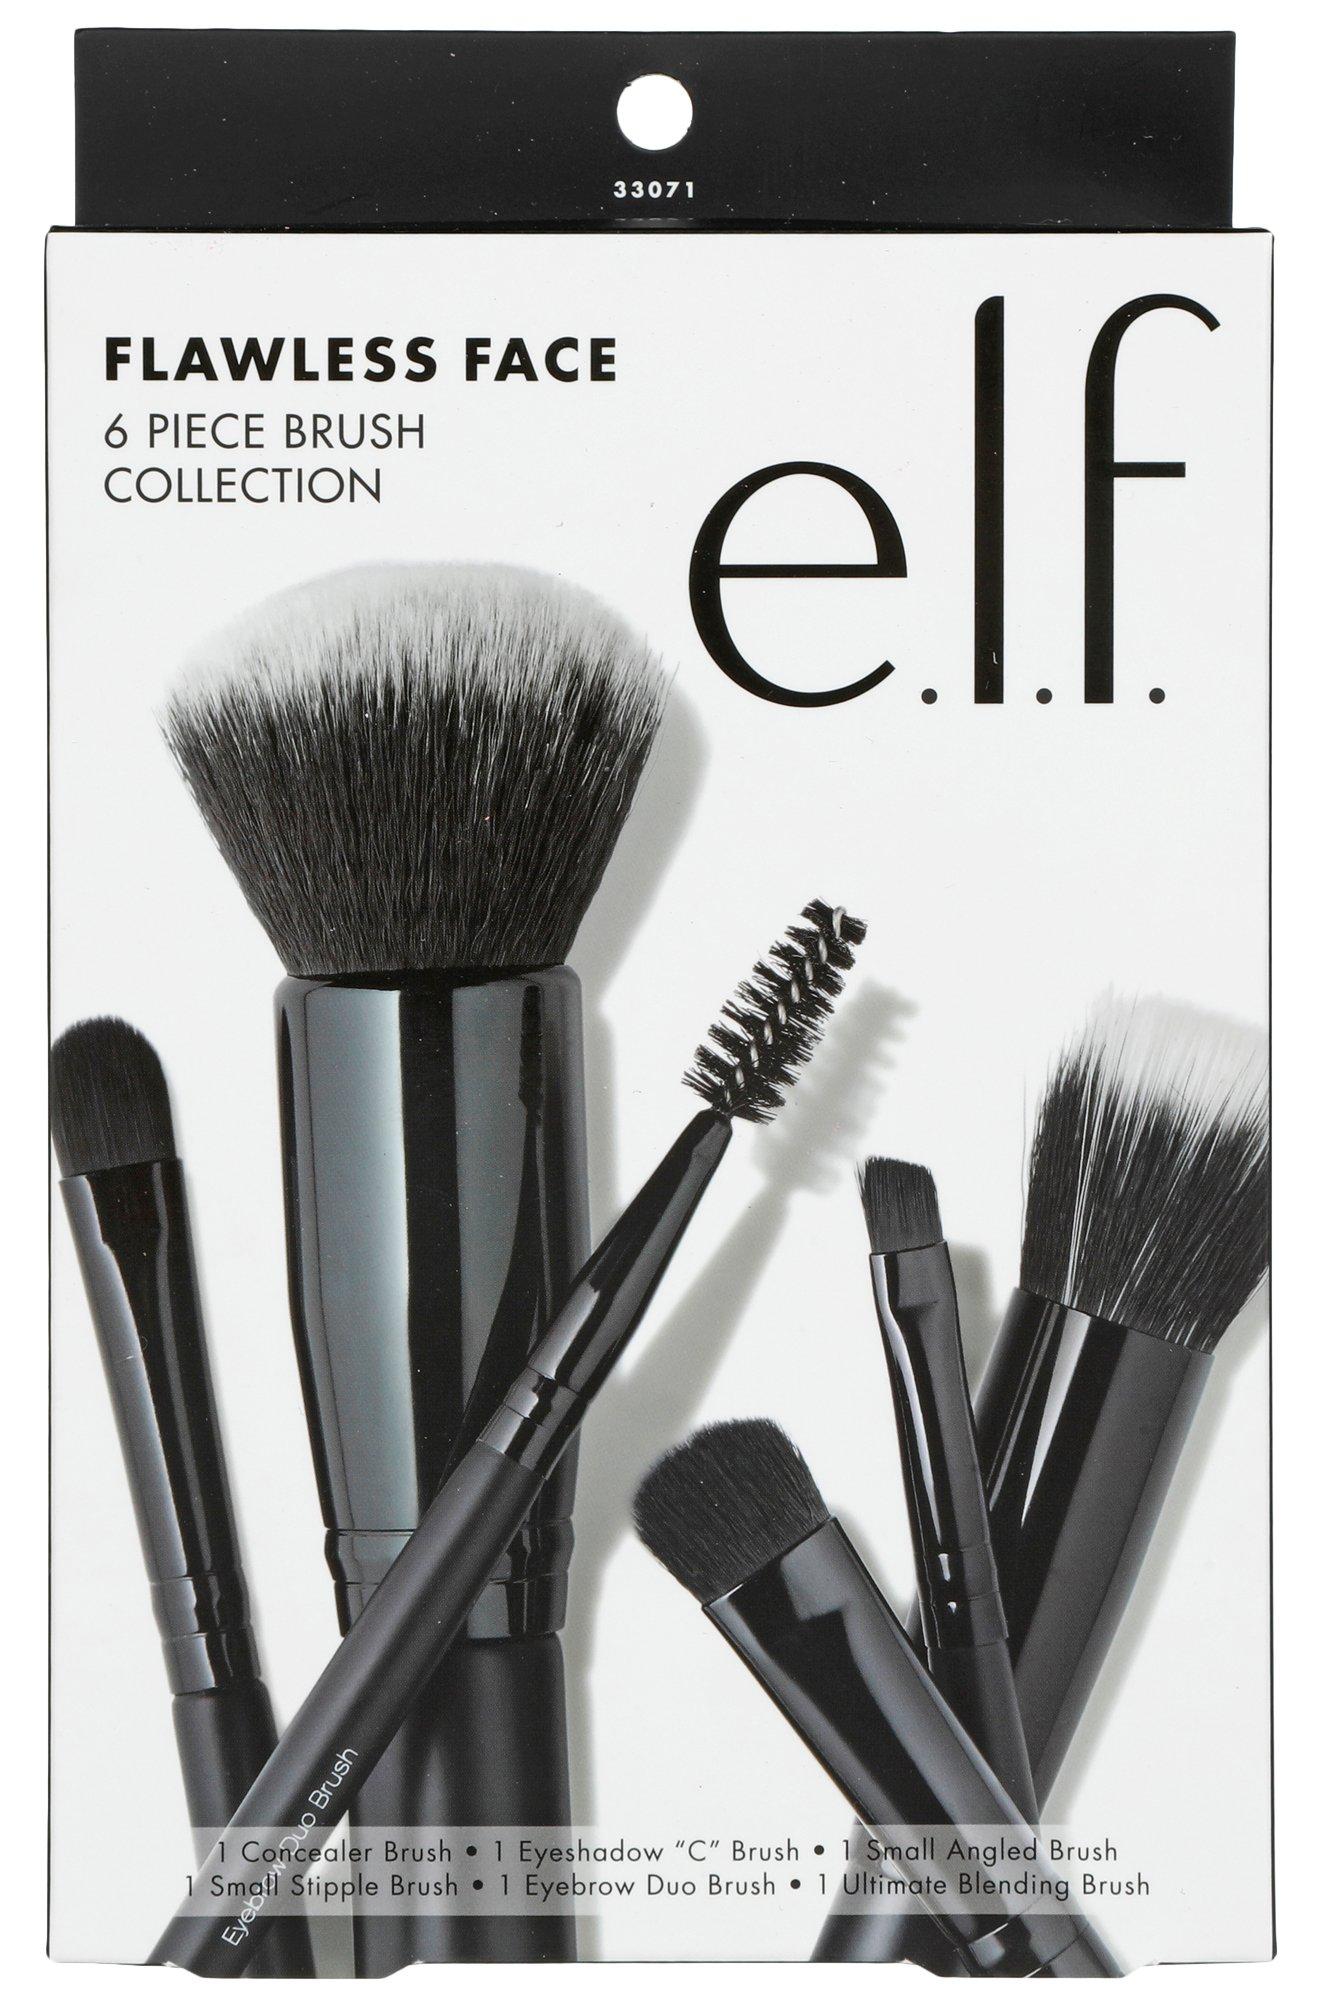 ELF 6 Pc. Flawless Face Makeup Brush Collection